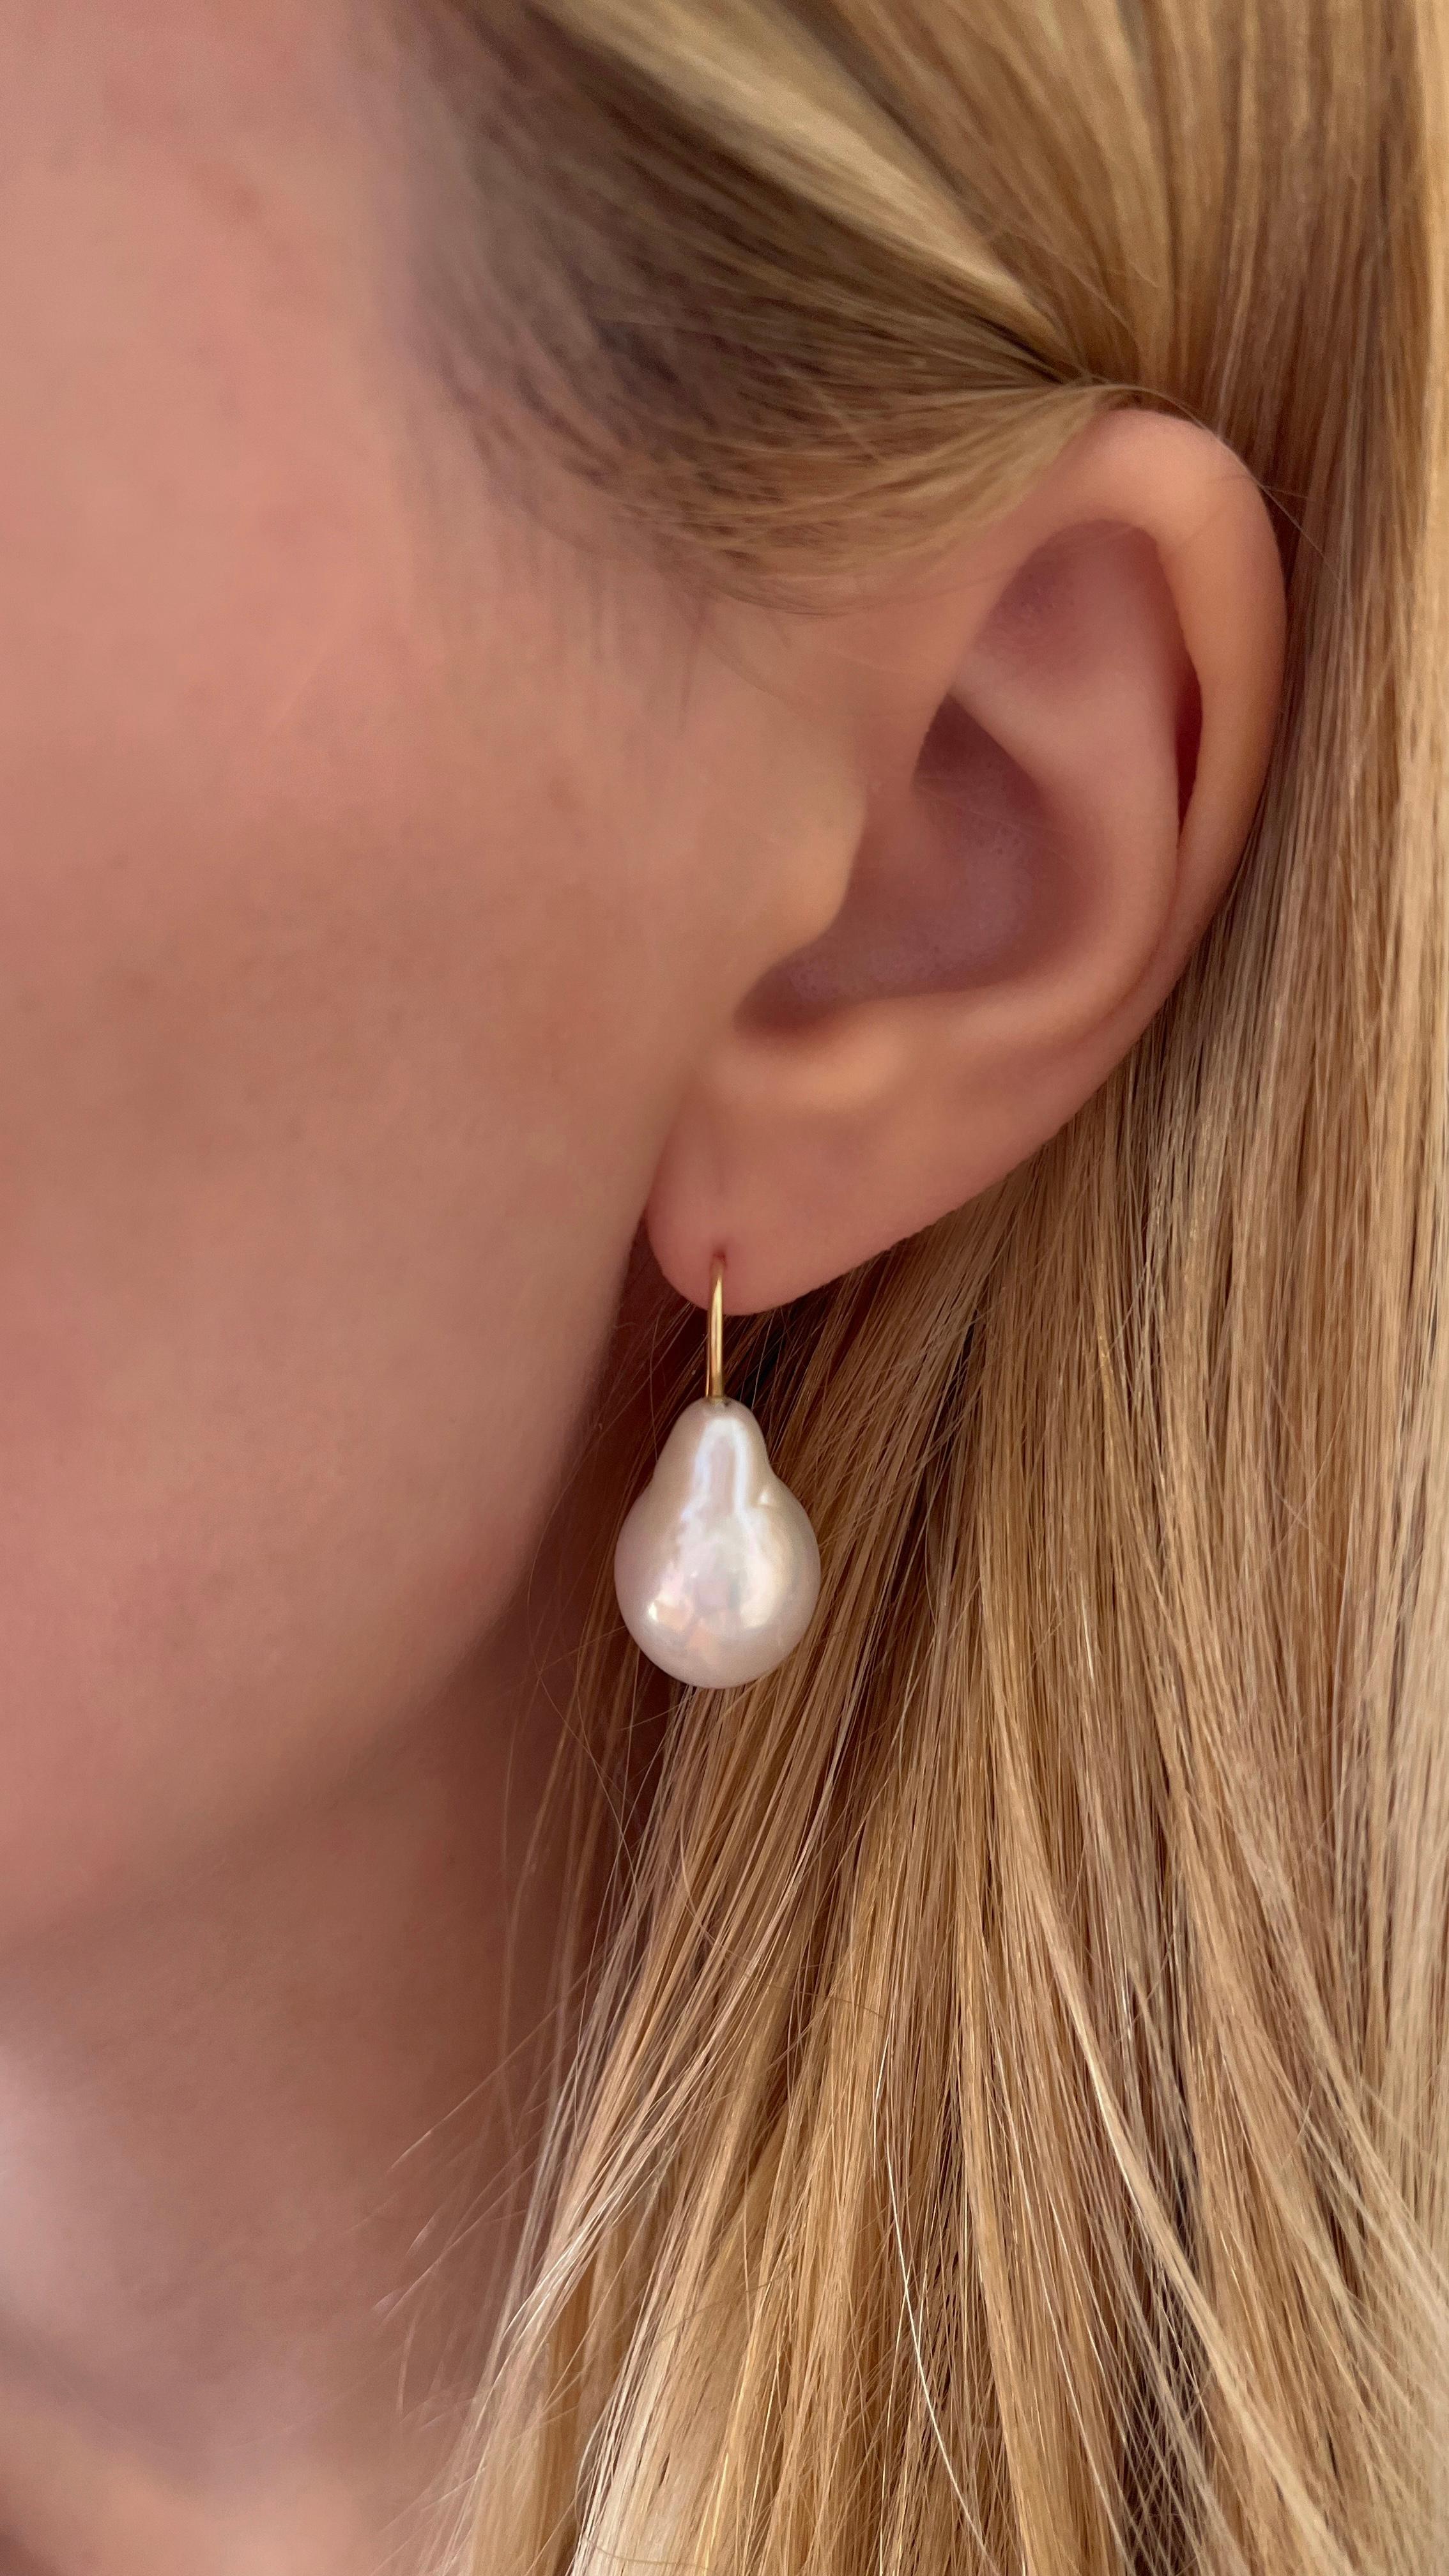 Our Baroque Drop Earrings are a best seller in our collection. This pair of earrings features baroque, drop shape pearls and a slim 18K Yellow Gold hook design that slips on to the ear. They are easy to slip on and comfortable to wear all day long